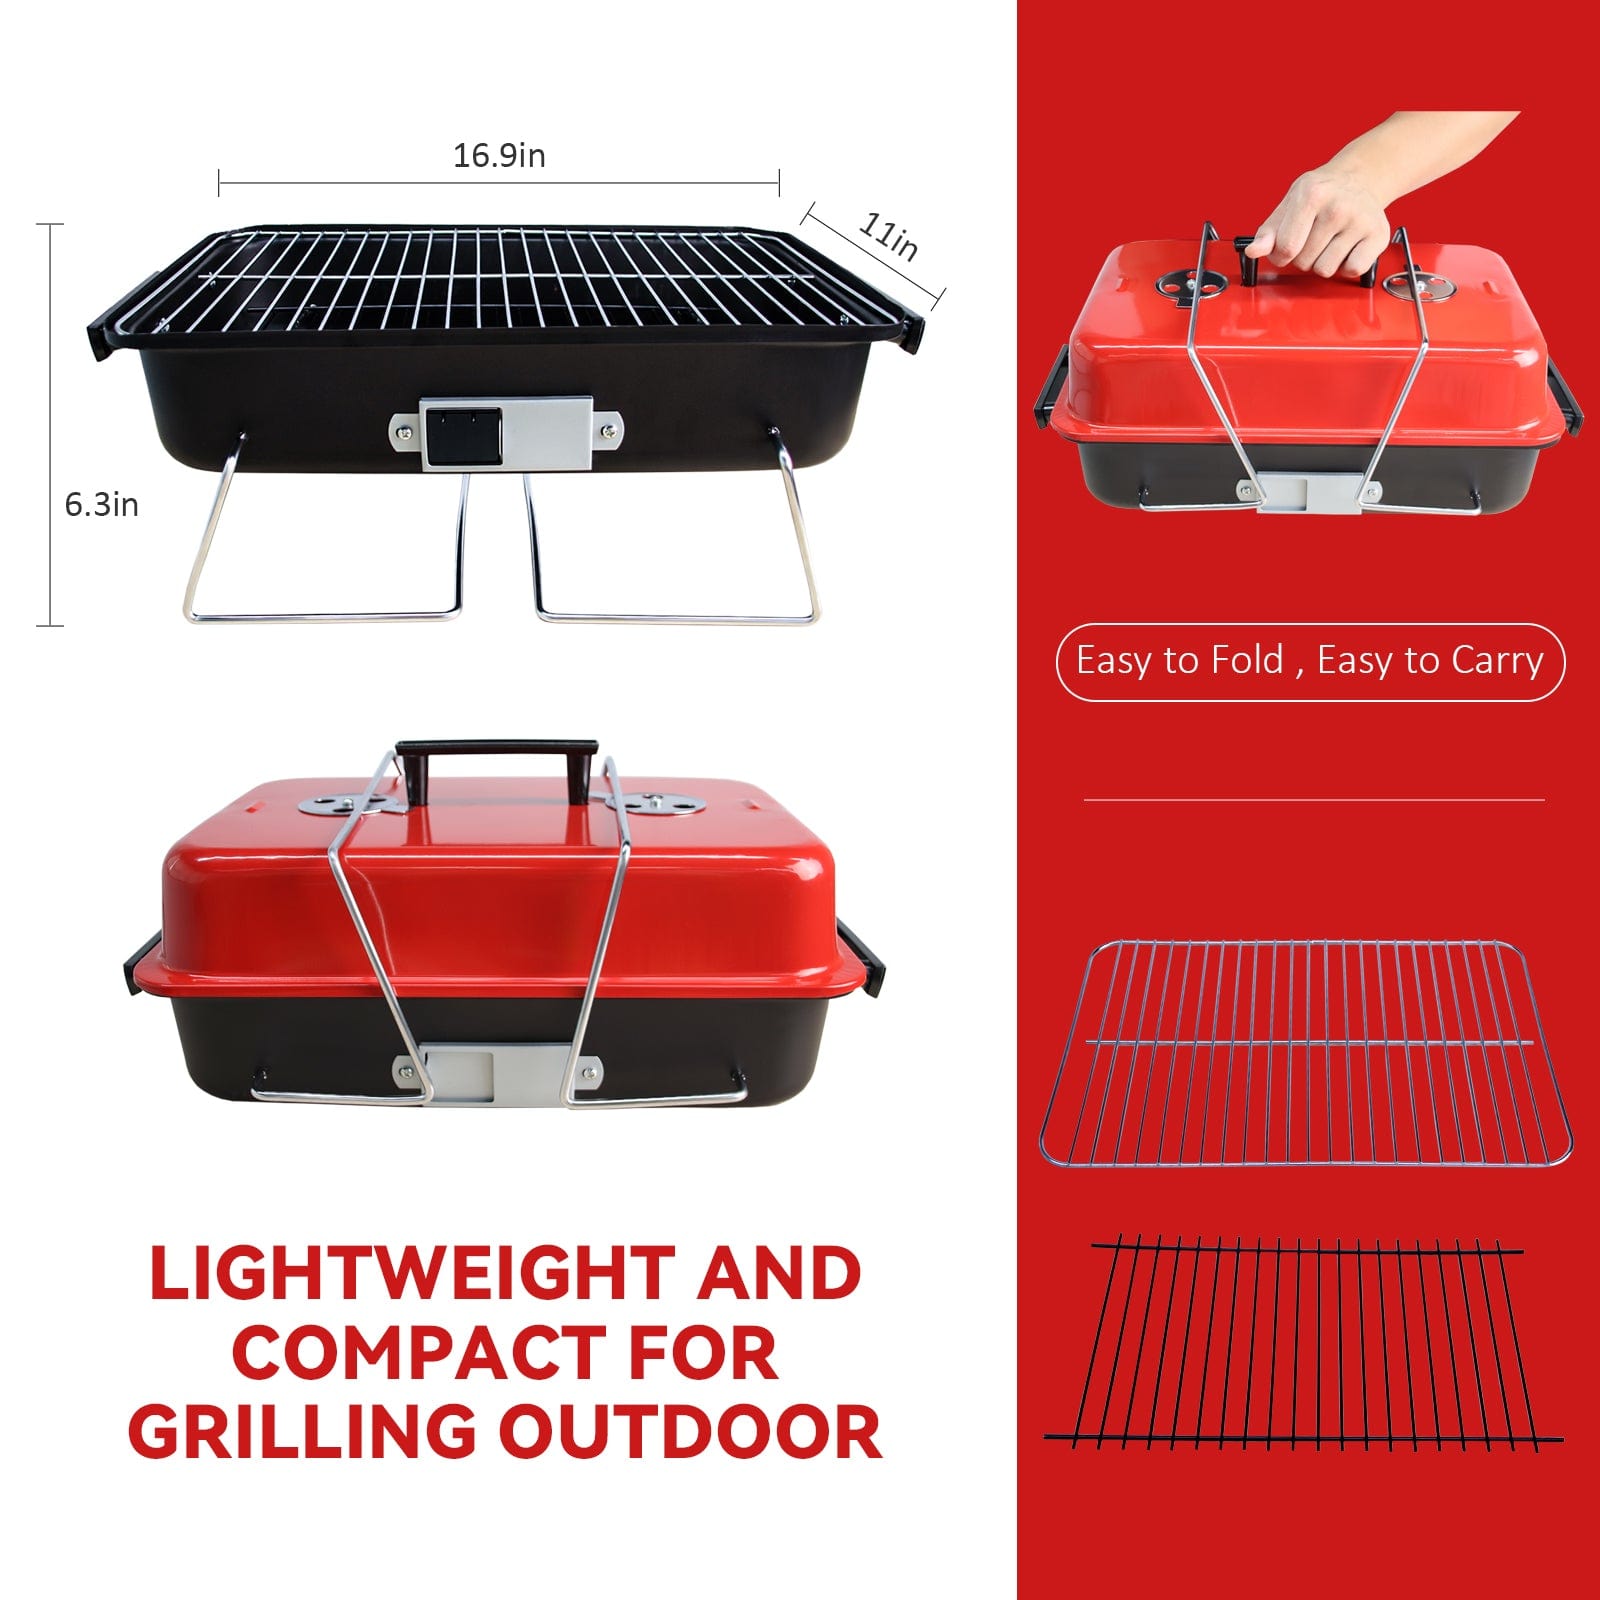 GeerTop Outdoor Store grill GeerTop Portable Charcoal Grill With Lid